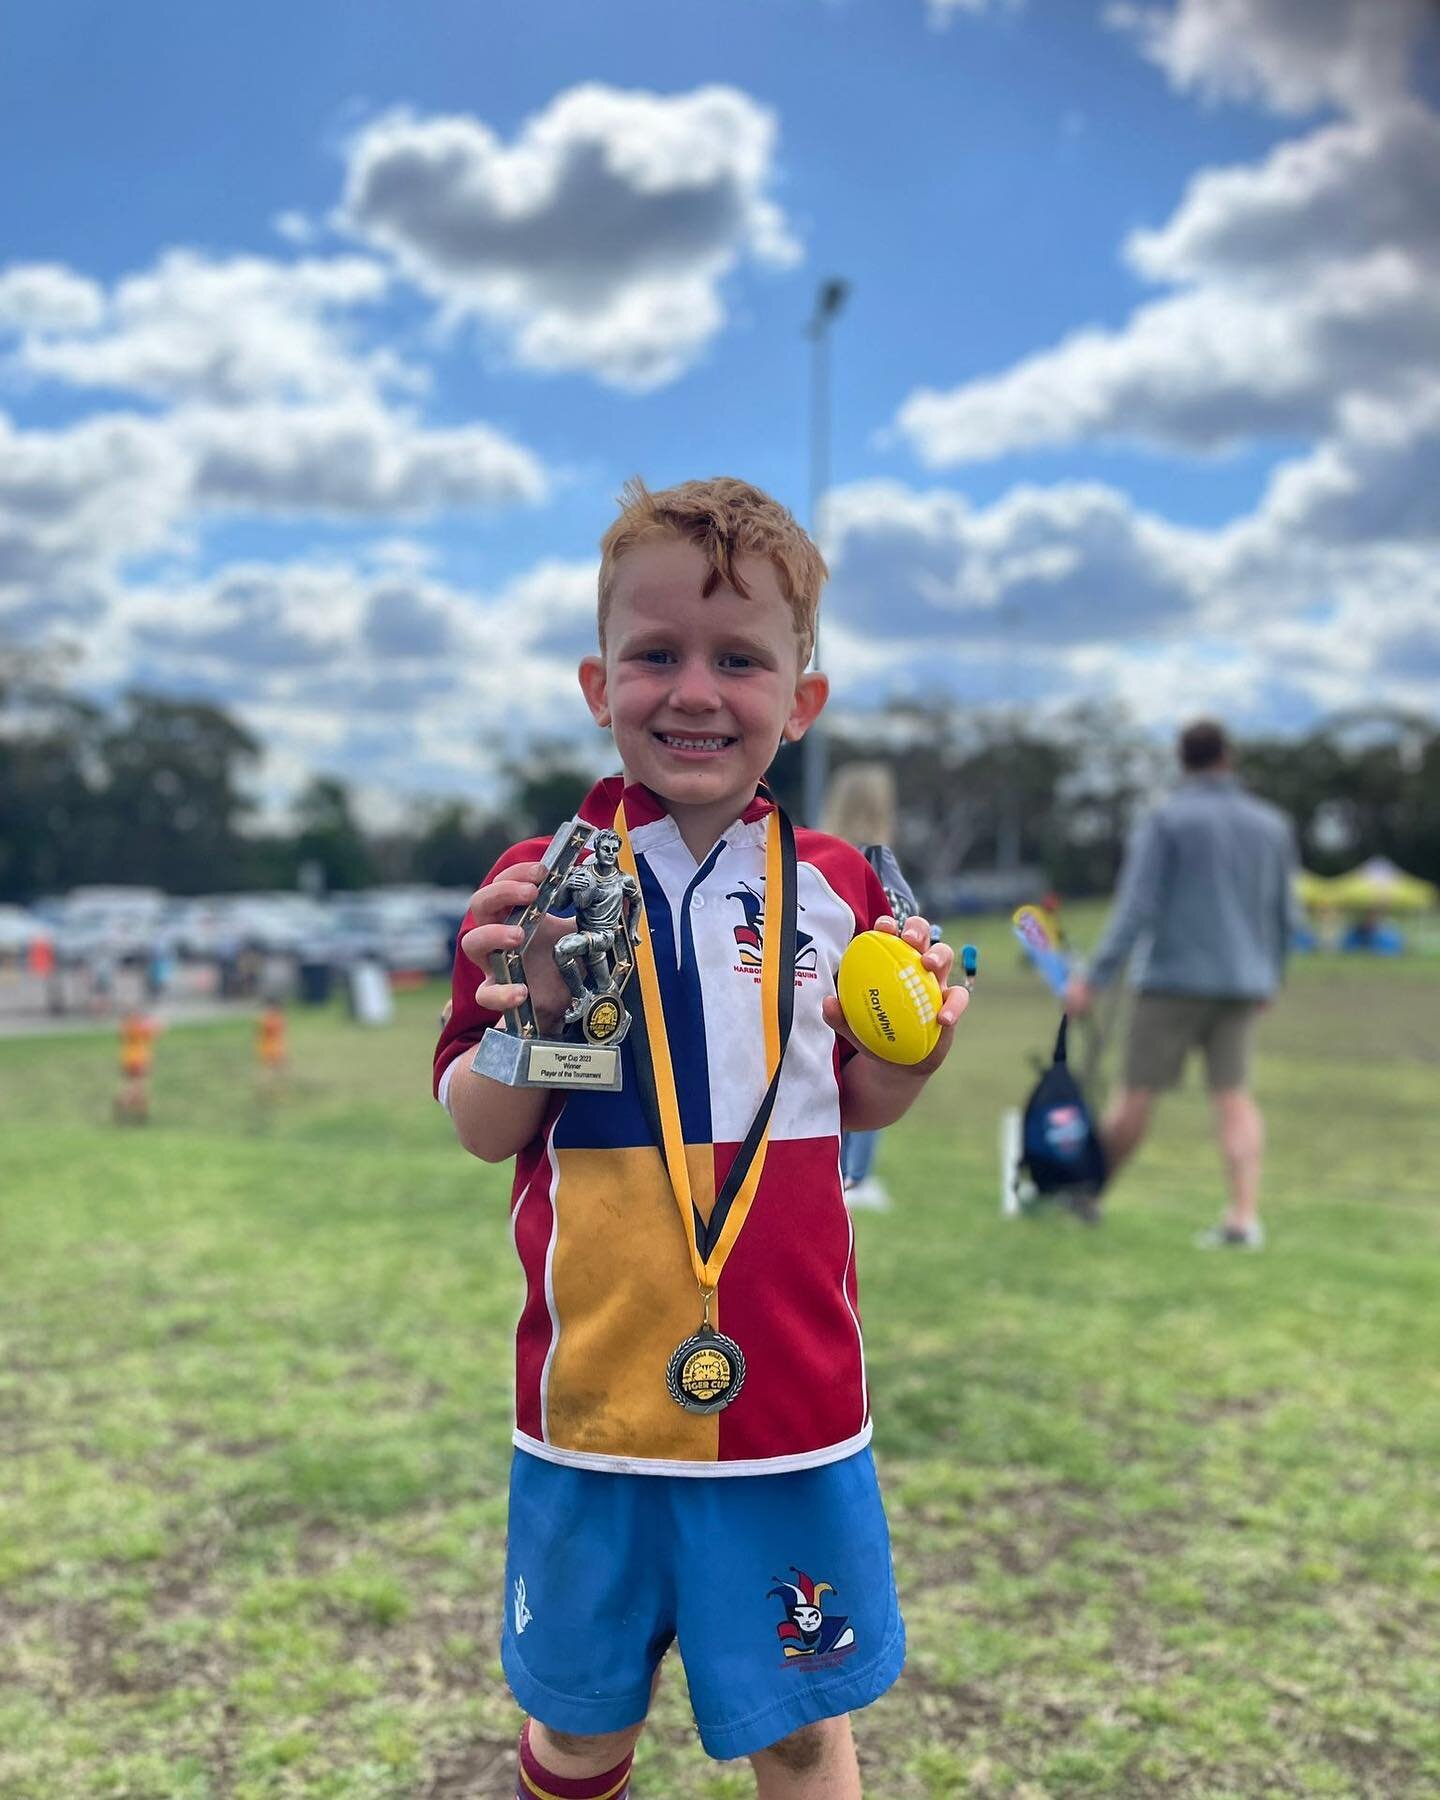 Congratulations to legend Luke who took out the U6 player of the day at Wahroonga tigers cup today. Well done champion and to the whole team who came 2nd in the relay. Thanks for a great day out @wahroongarugby